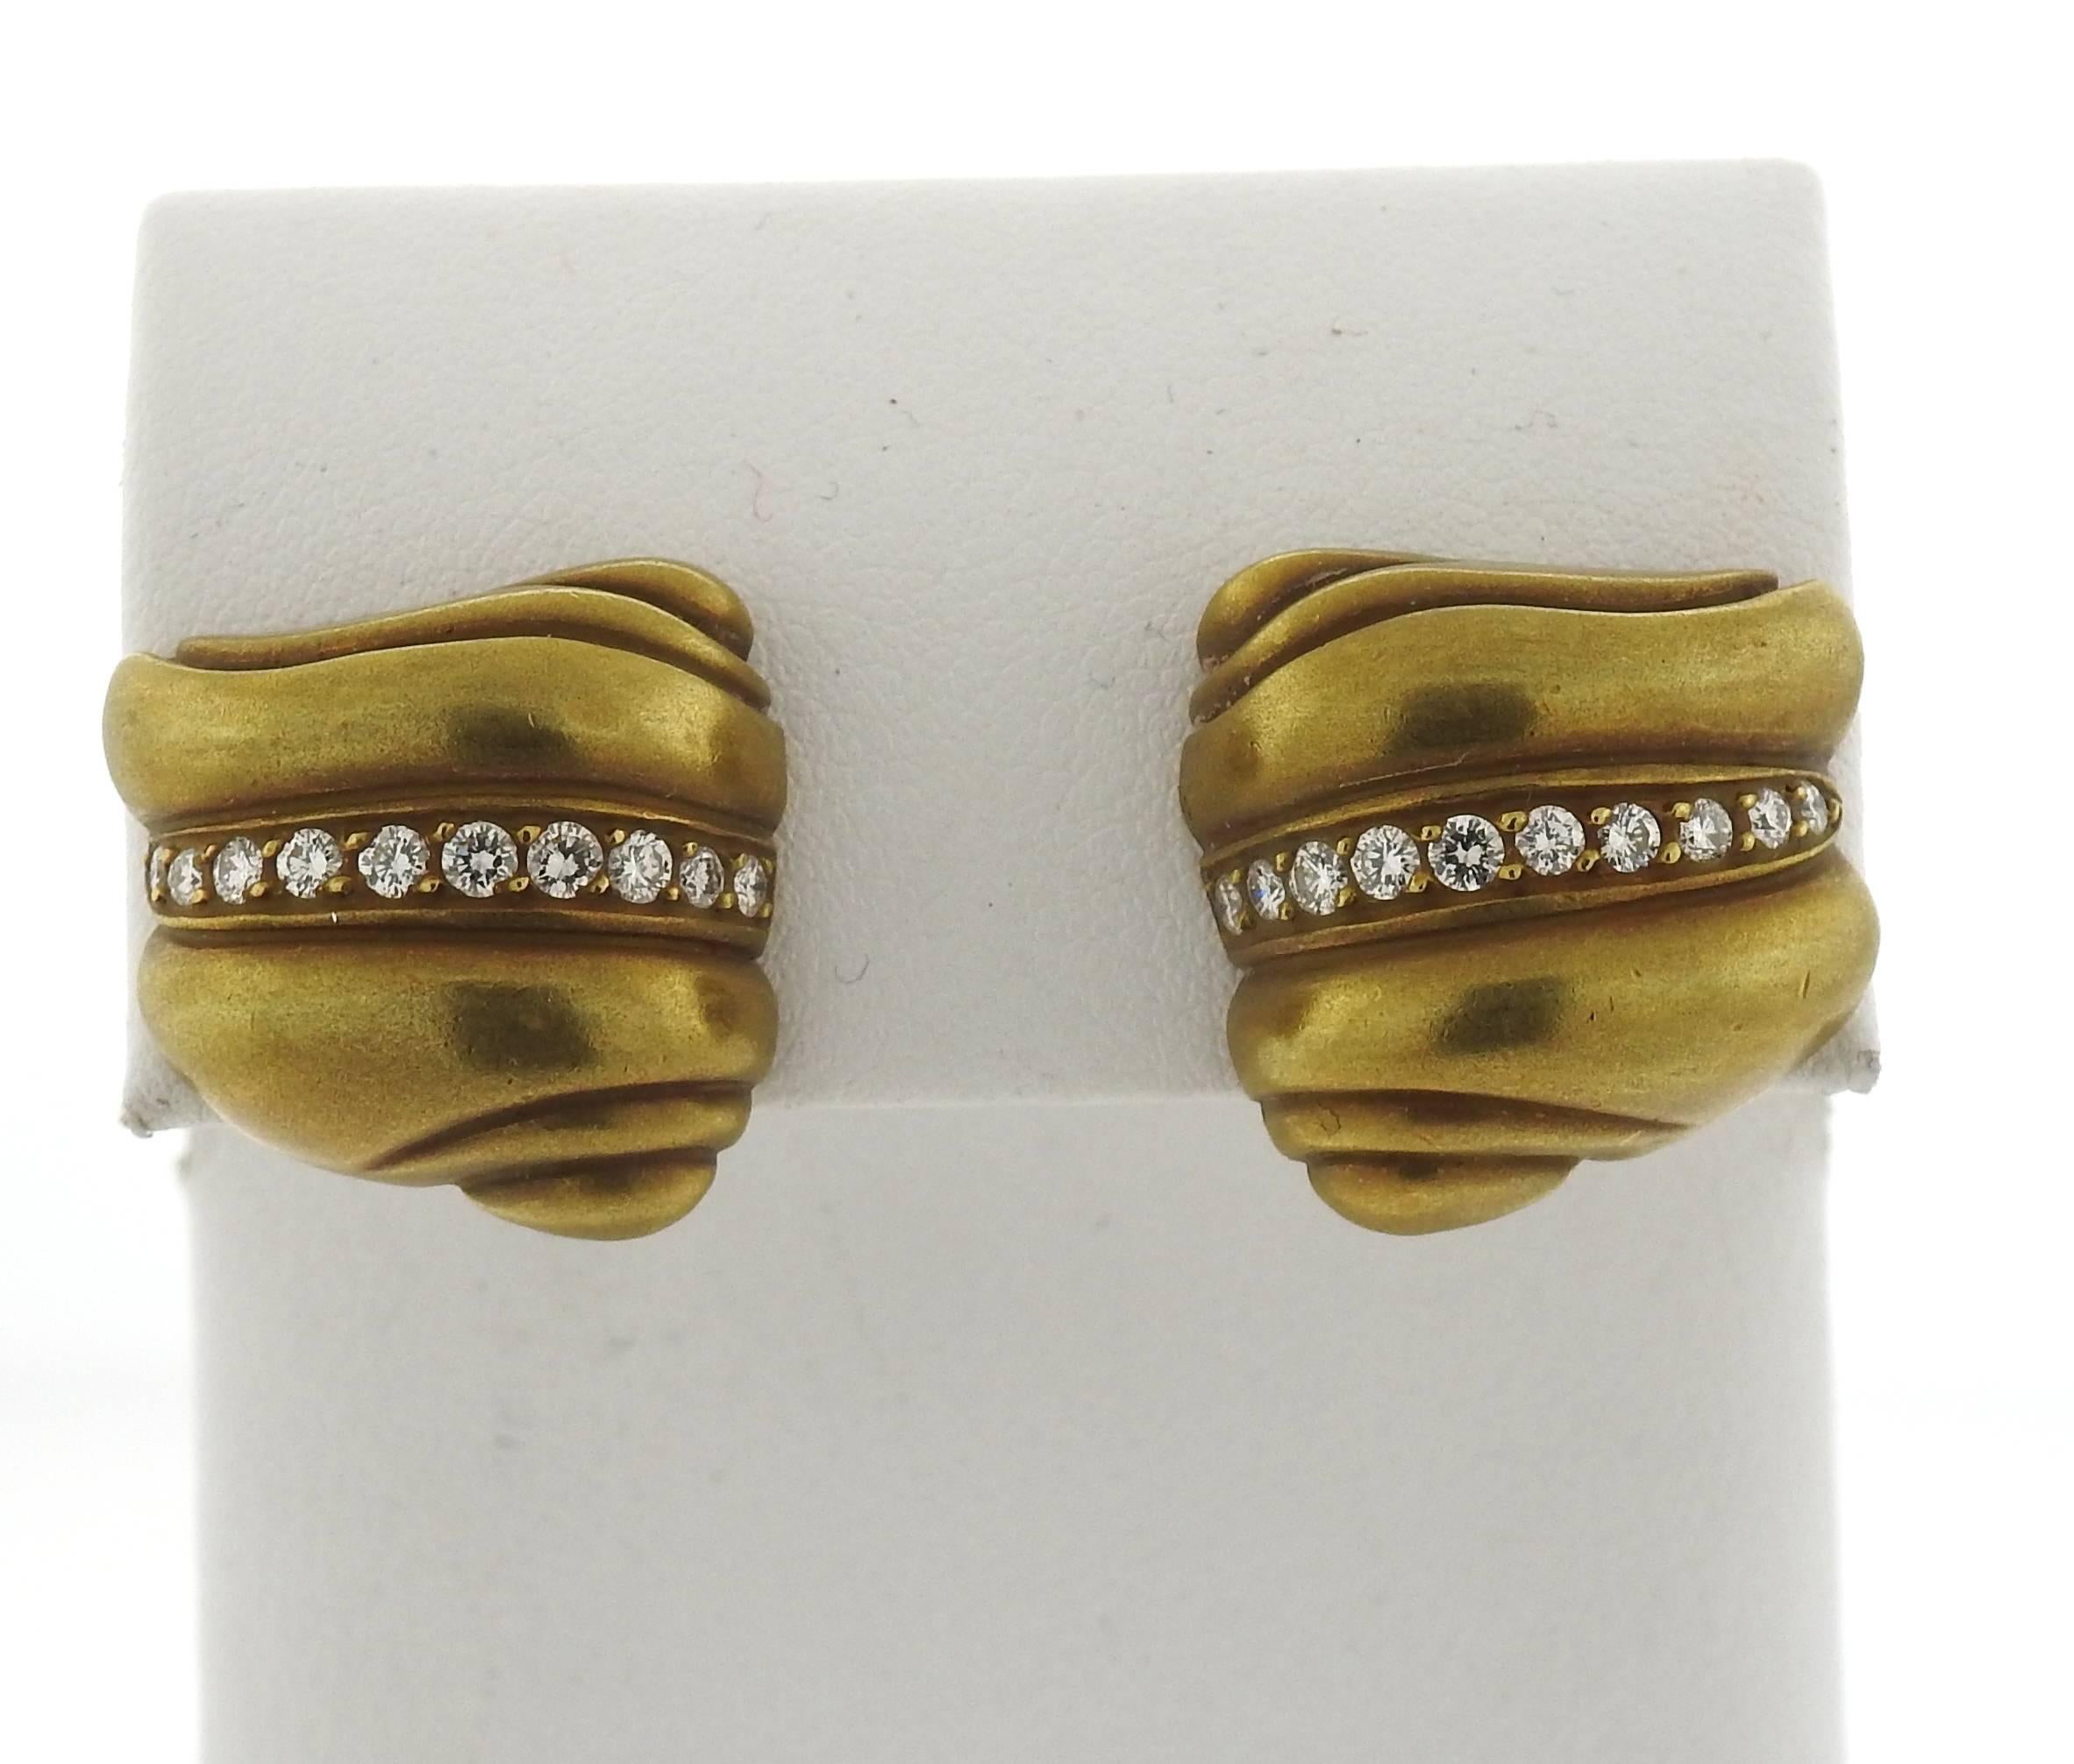 18k yellow gold earrings, crafted by Barry Kieselstein Cord, set with approx. 0.40ctw in G/VS diamonds. Earrings measure 21mm x 21mm. Marked: 1981, Kieselstein Cord, 18k. Weight - 21.7grams 